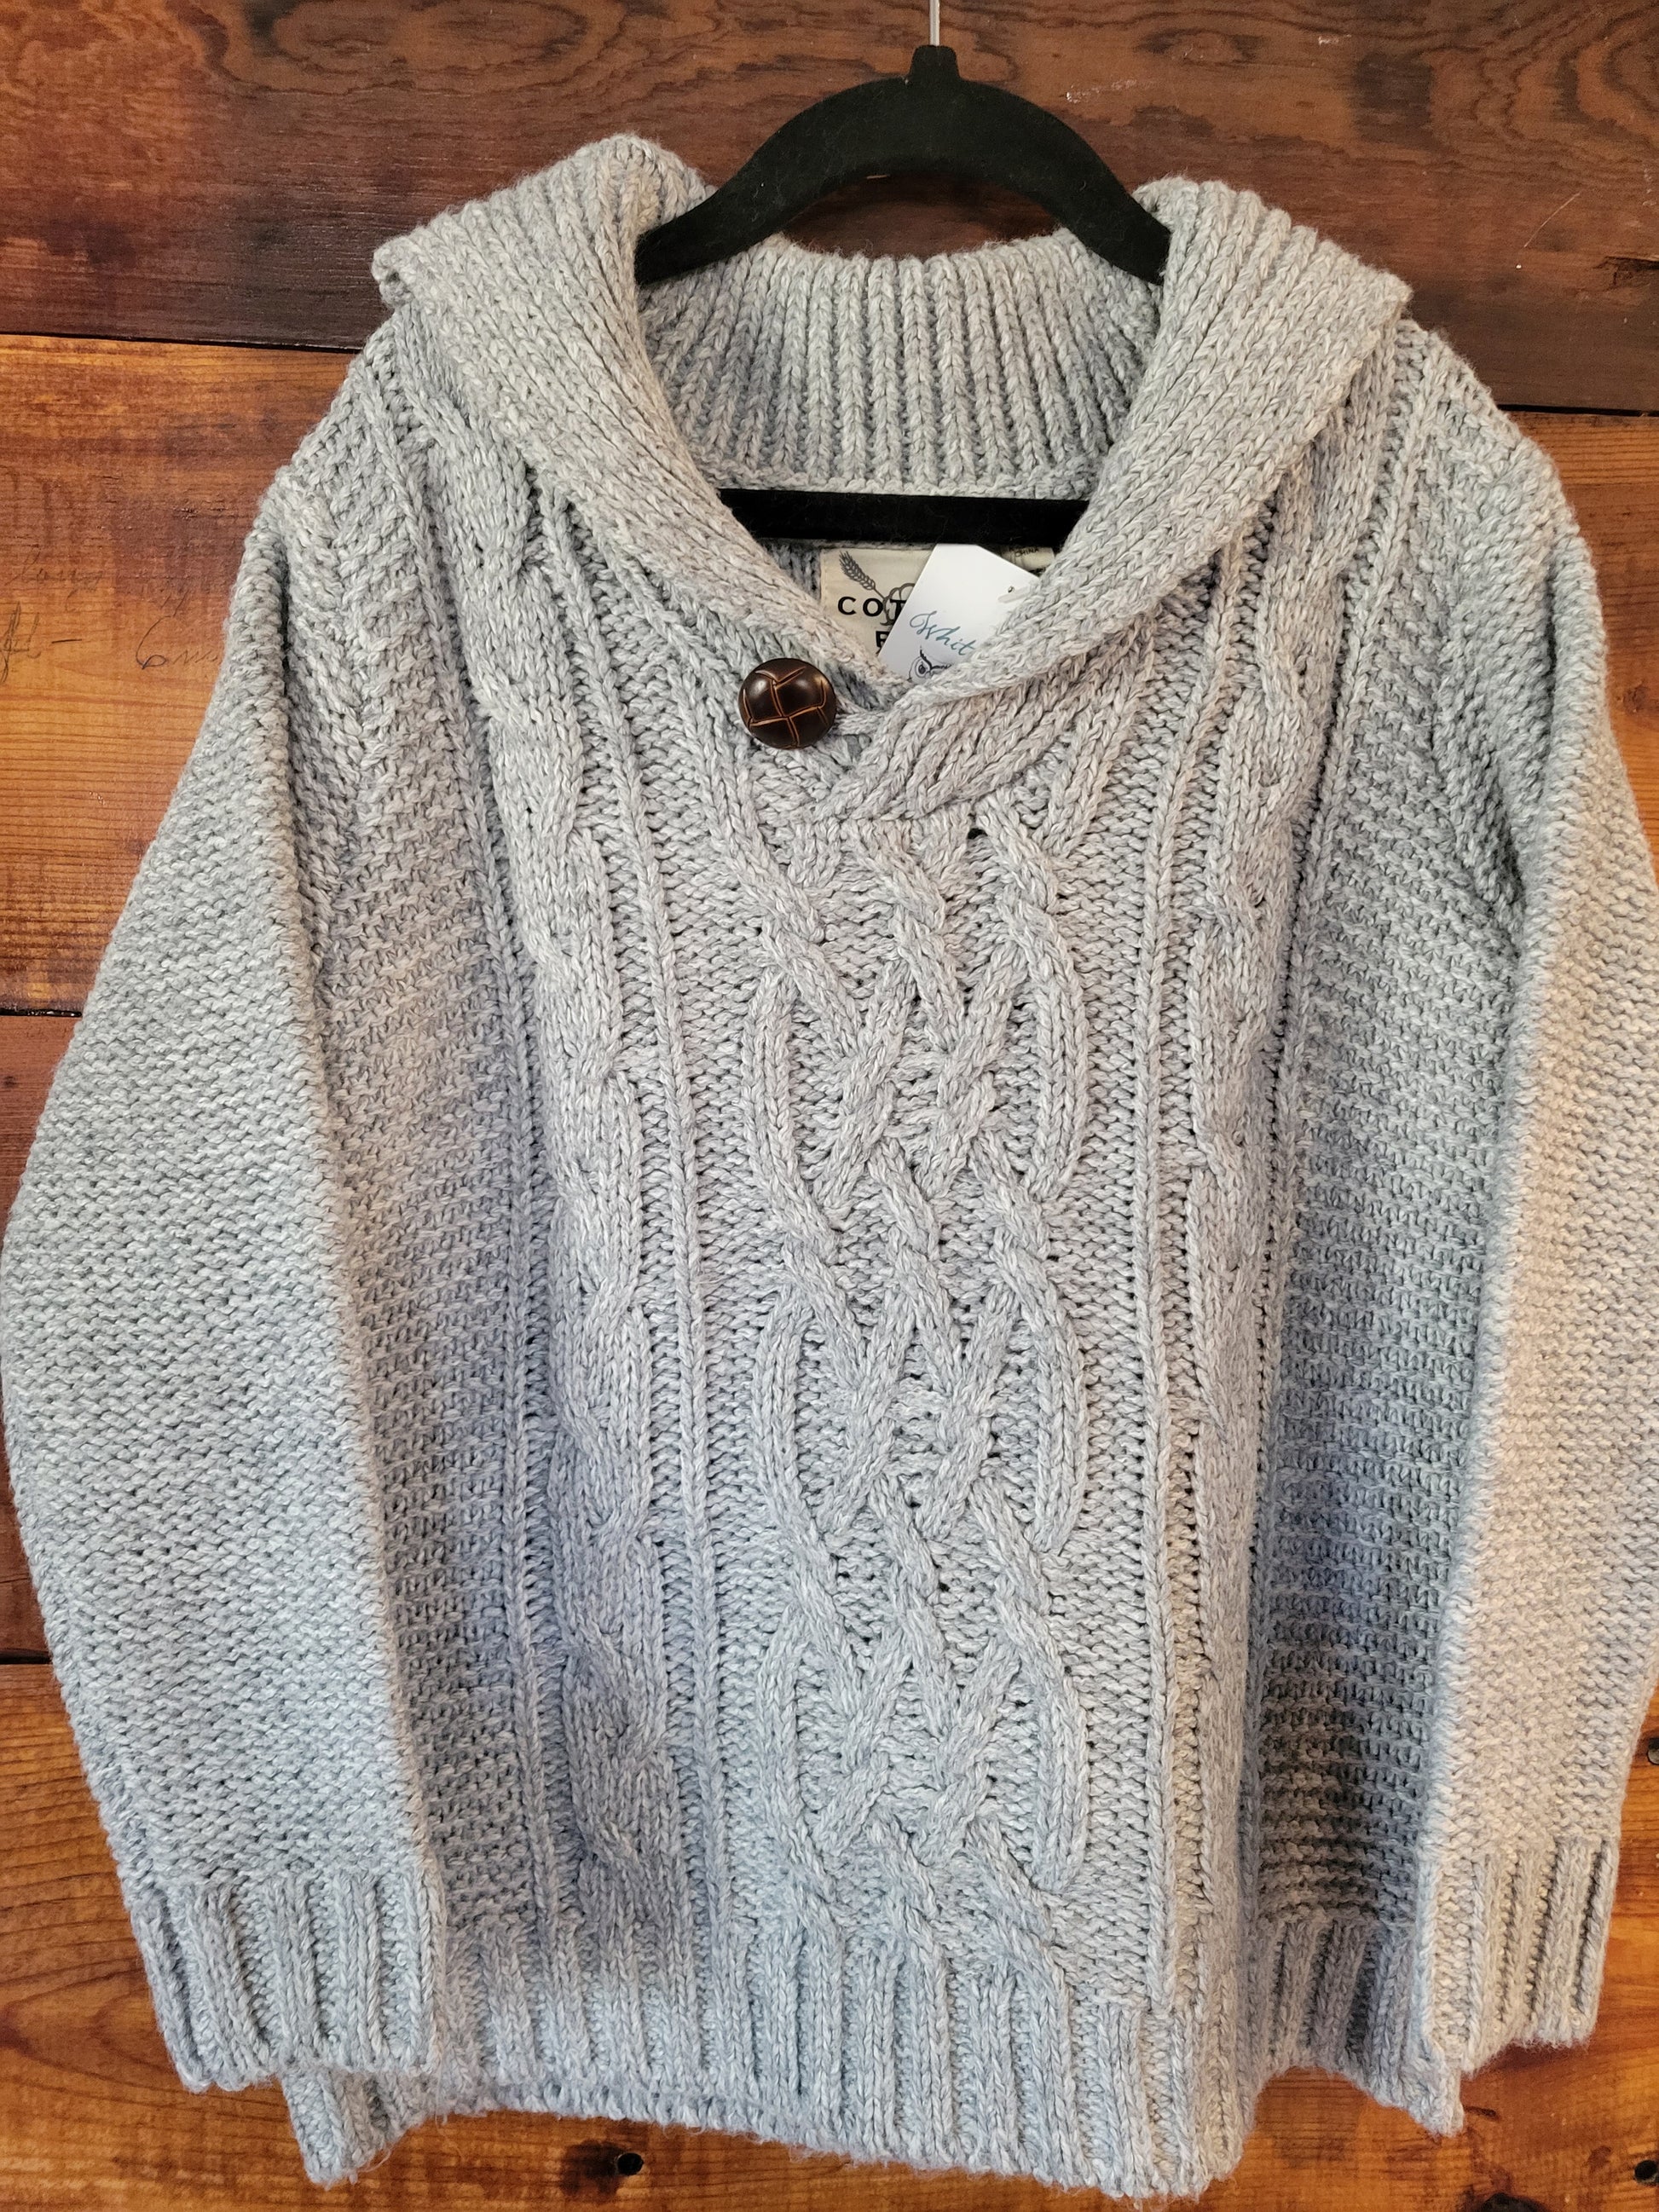 Boy's Cable Knit Sweater - White Owl Creek Boutique